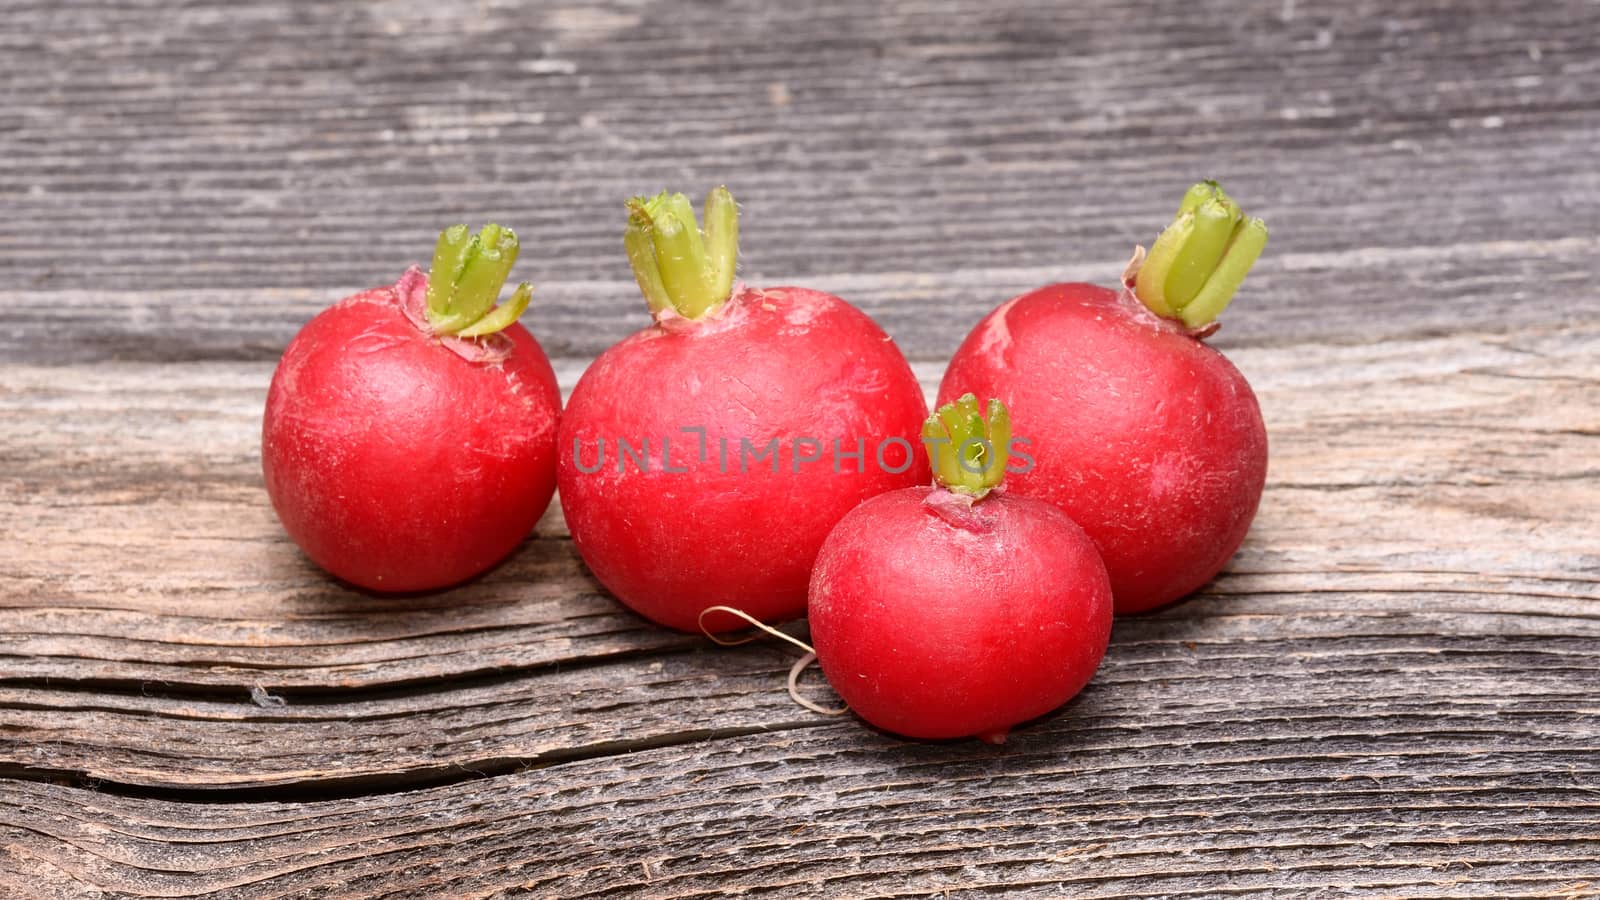 Fresh radishes on wooden table by comet